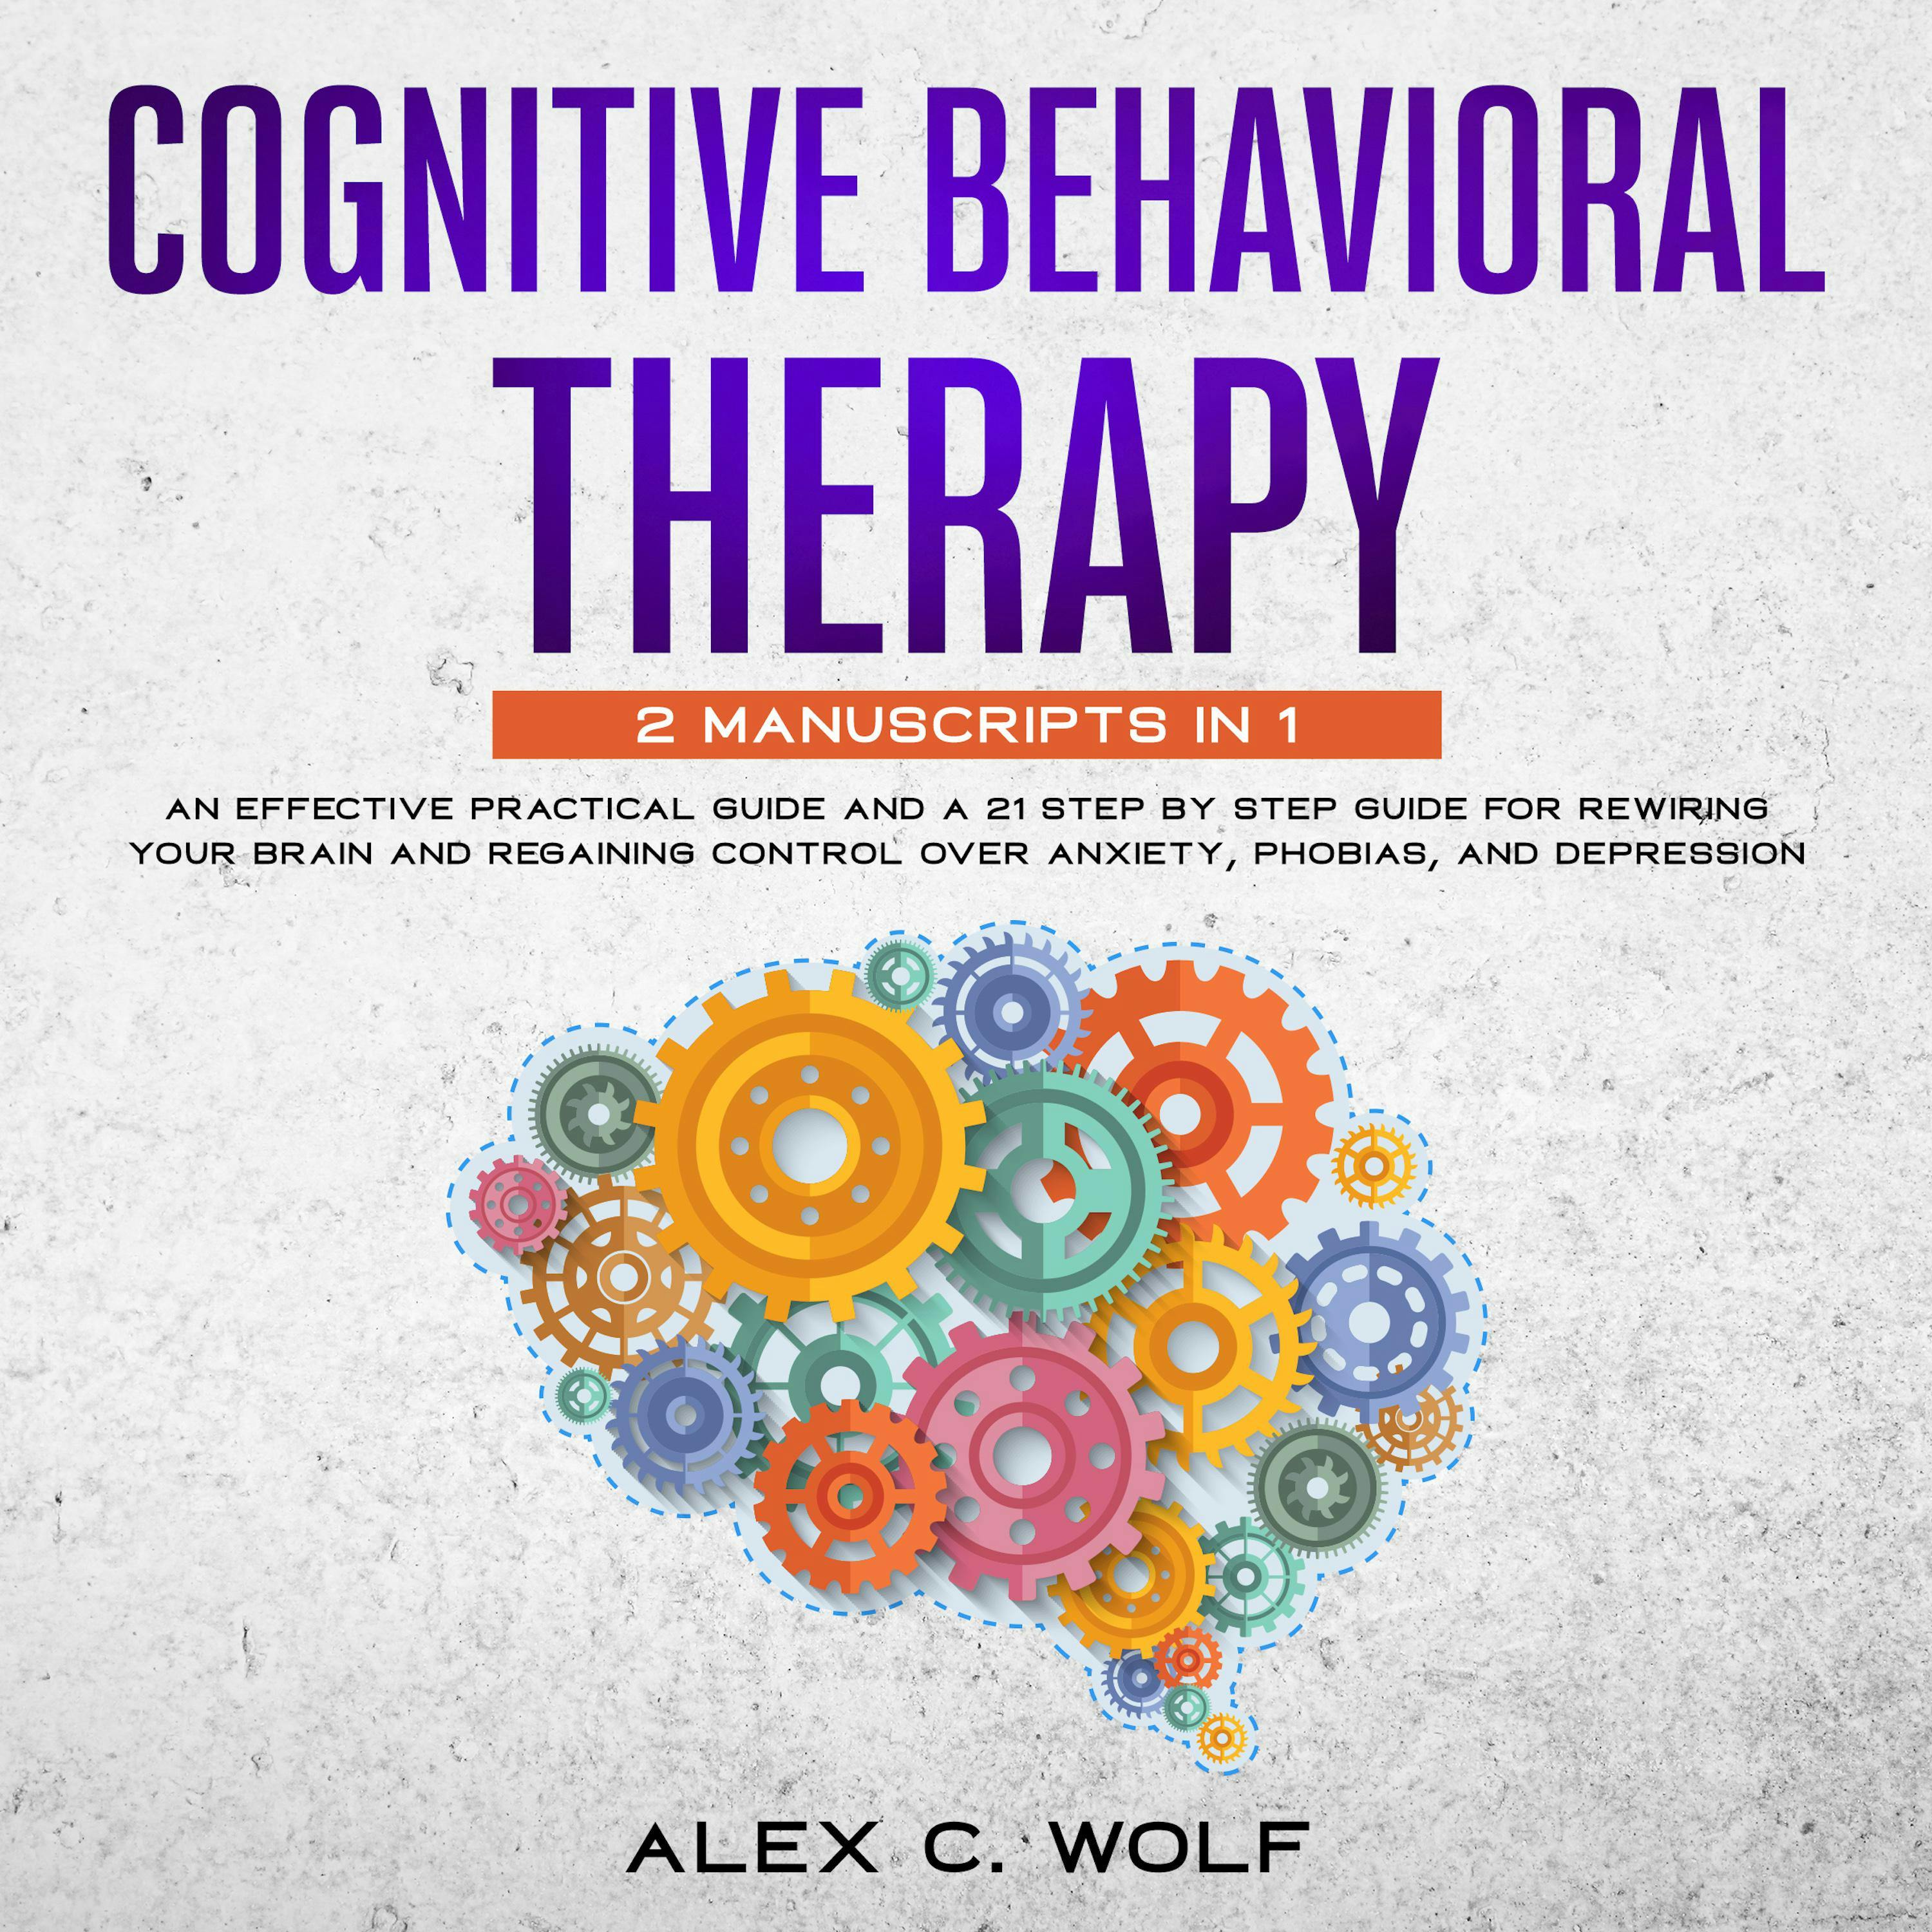 Cognitive Behavioral Therapy: An Effective Practical Guide and A 21 Step by Step Guide for Rewiring Your Brain and Regaining Control Over Anxiety, Phobias, and Depression - Alex C. Wolf